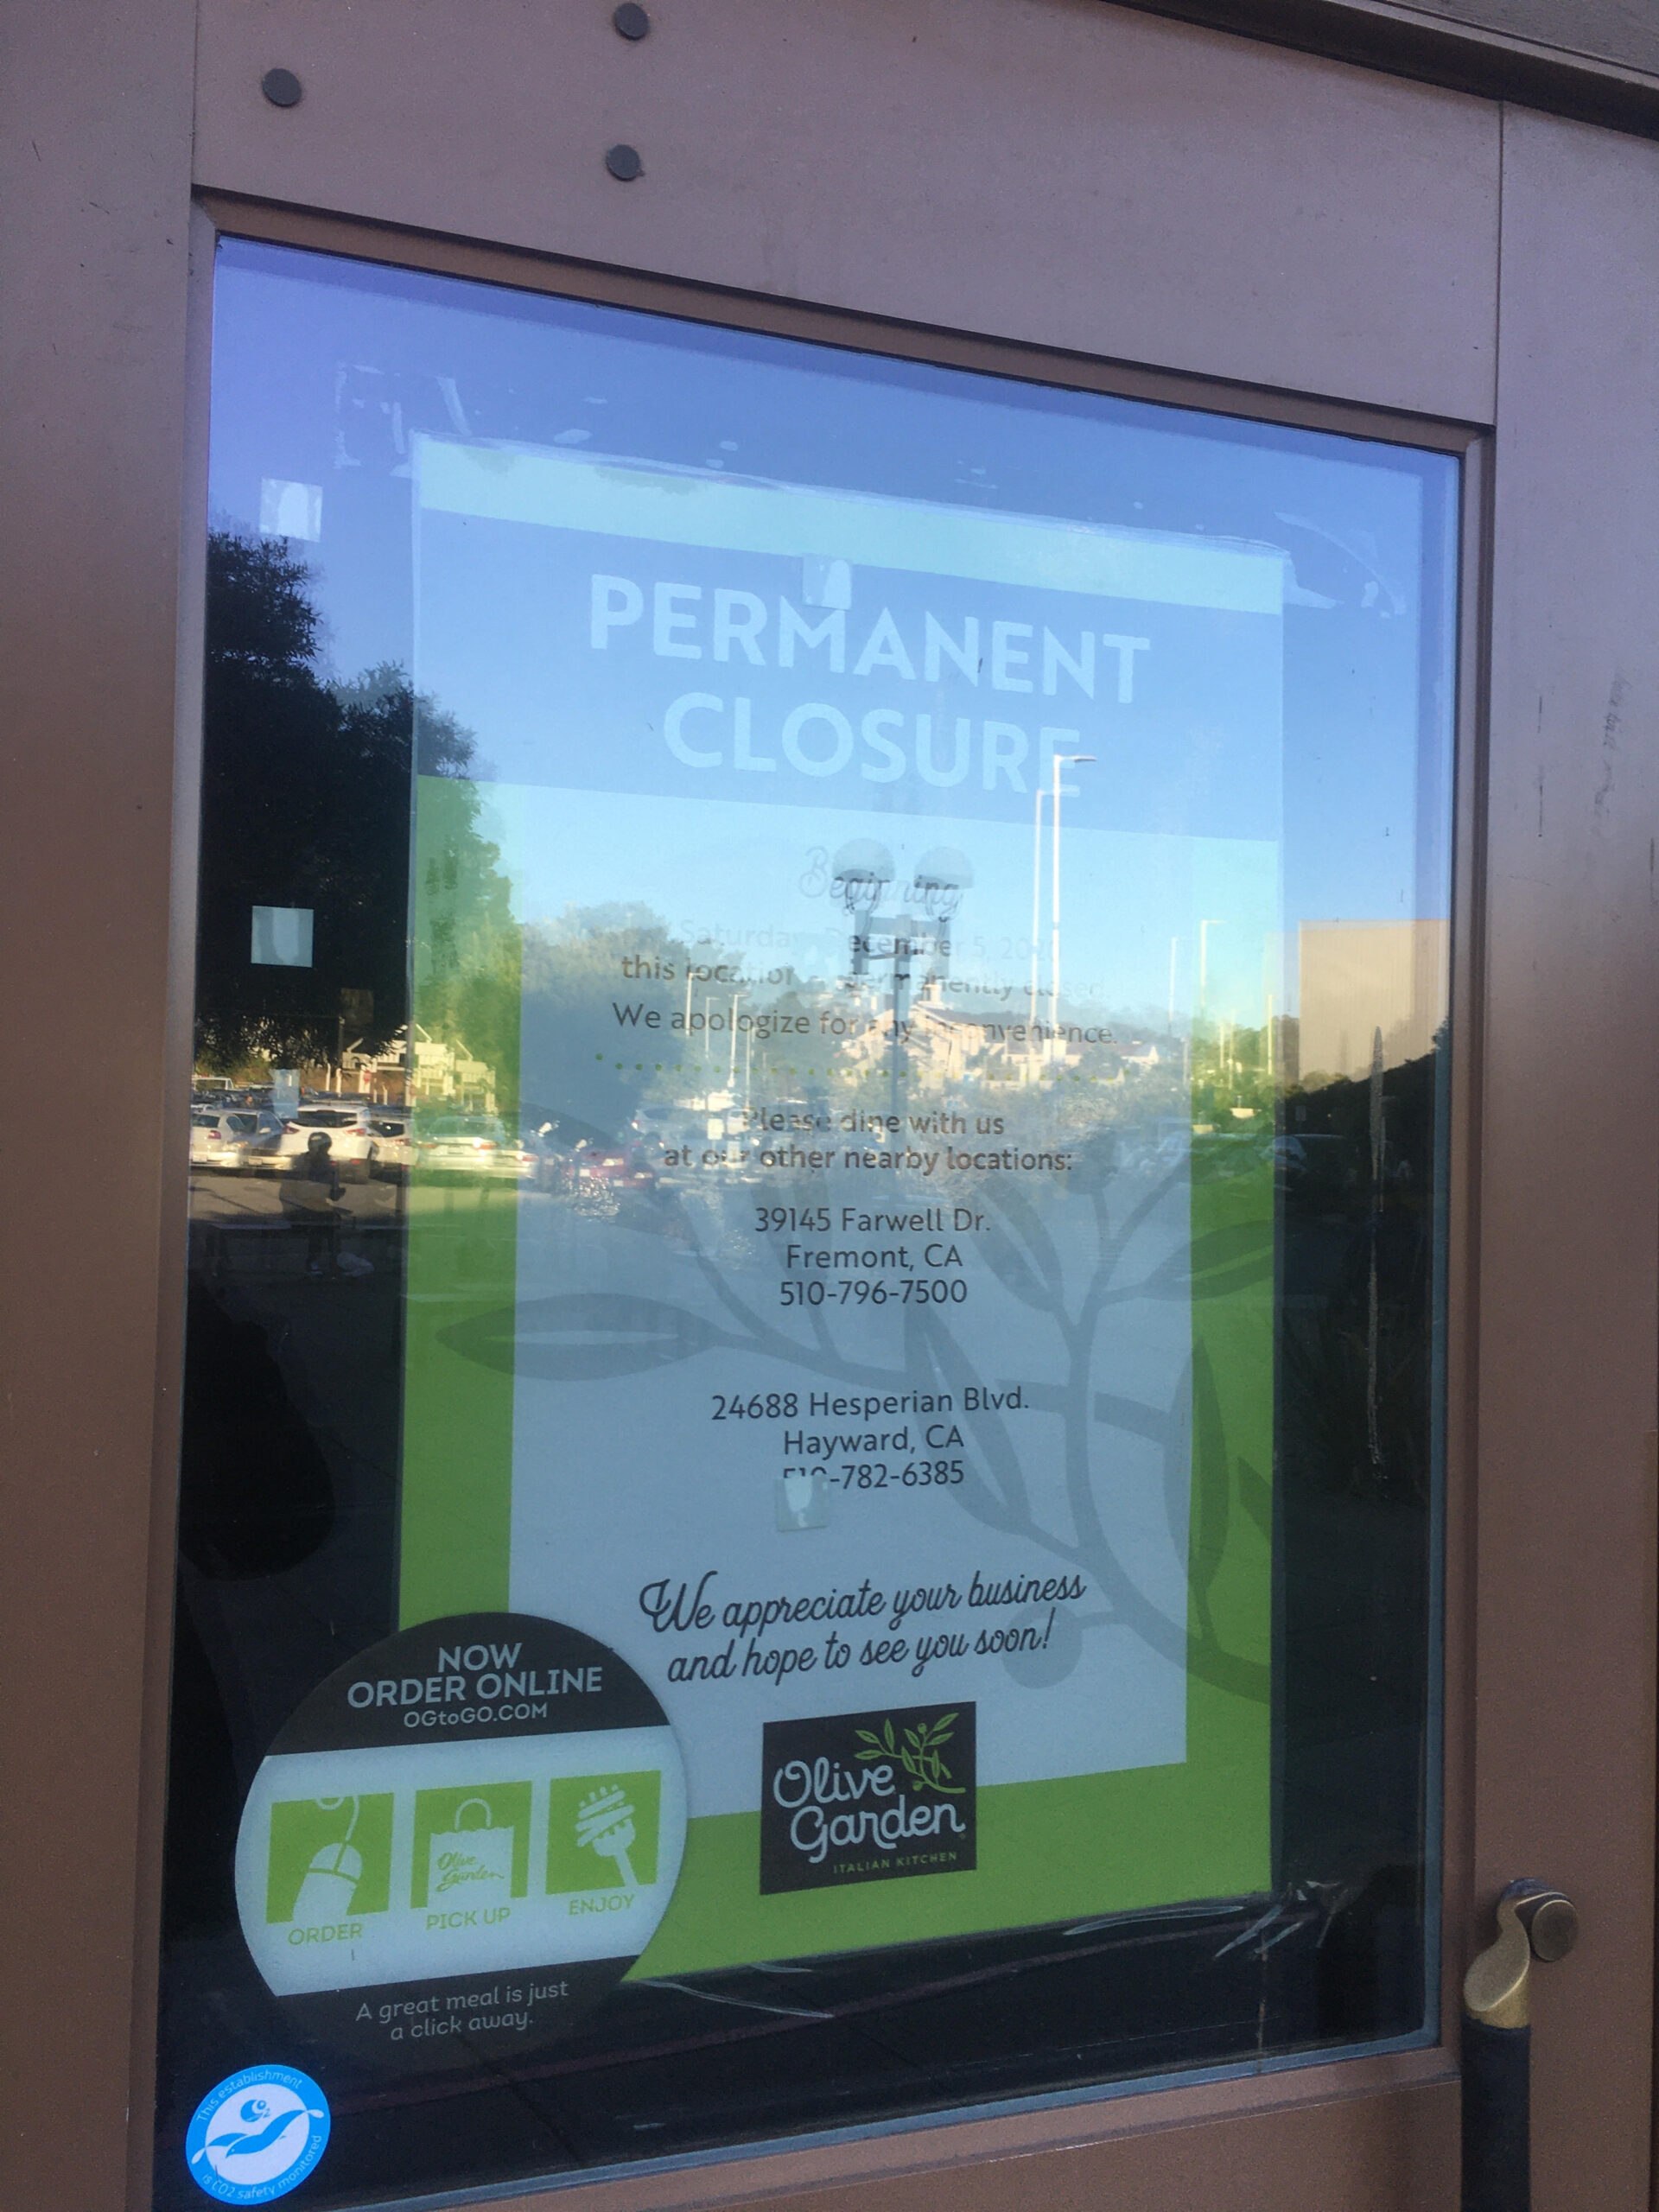 San Francisco S Only Olive Garden Closes During Covid Pandemic San Francisco News